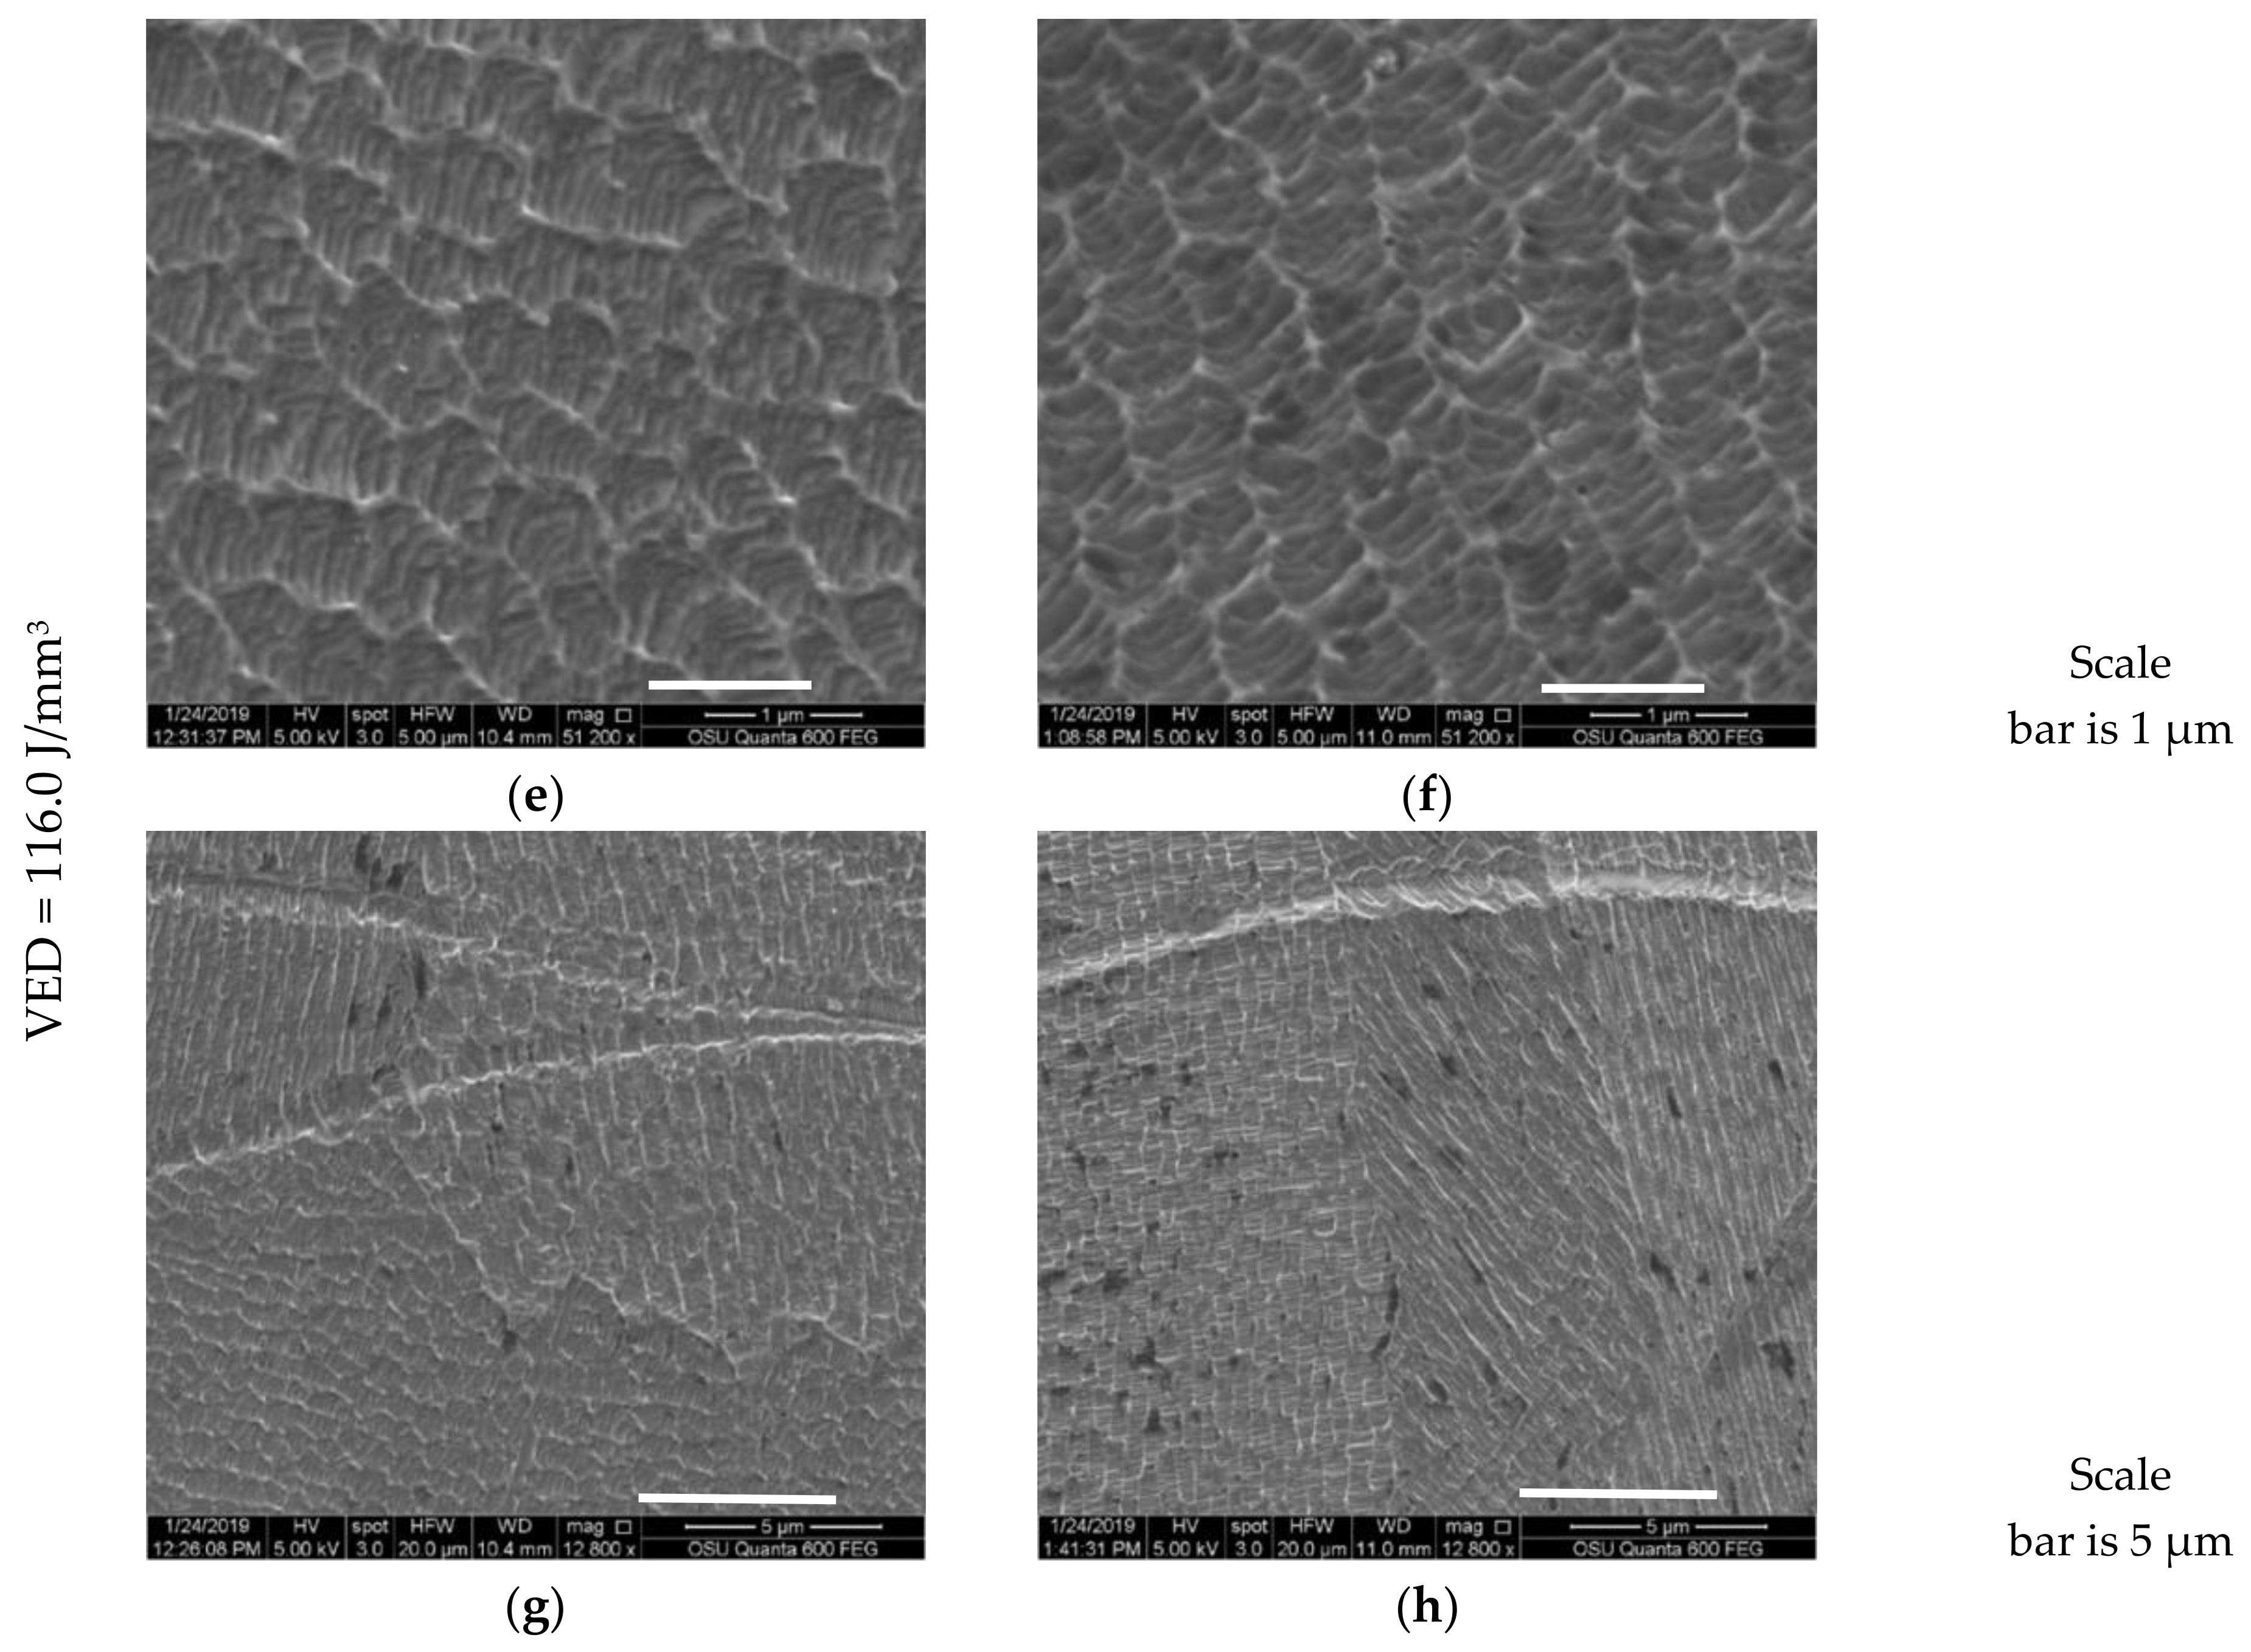 Jmmp Free Full Text Use Of Bimodal Particle Size Distribution In Selective Laser Melting Of 316l Stainless Steel Html